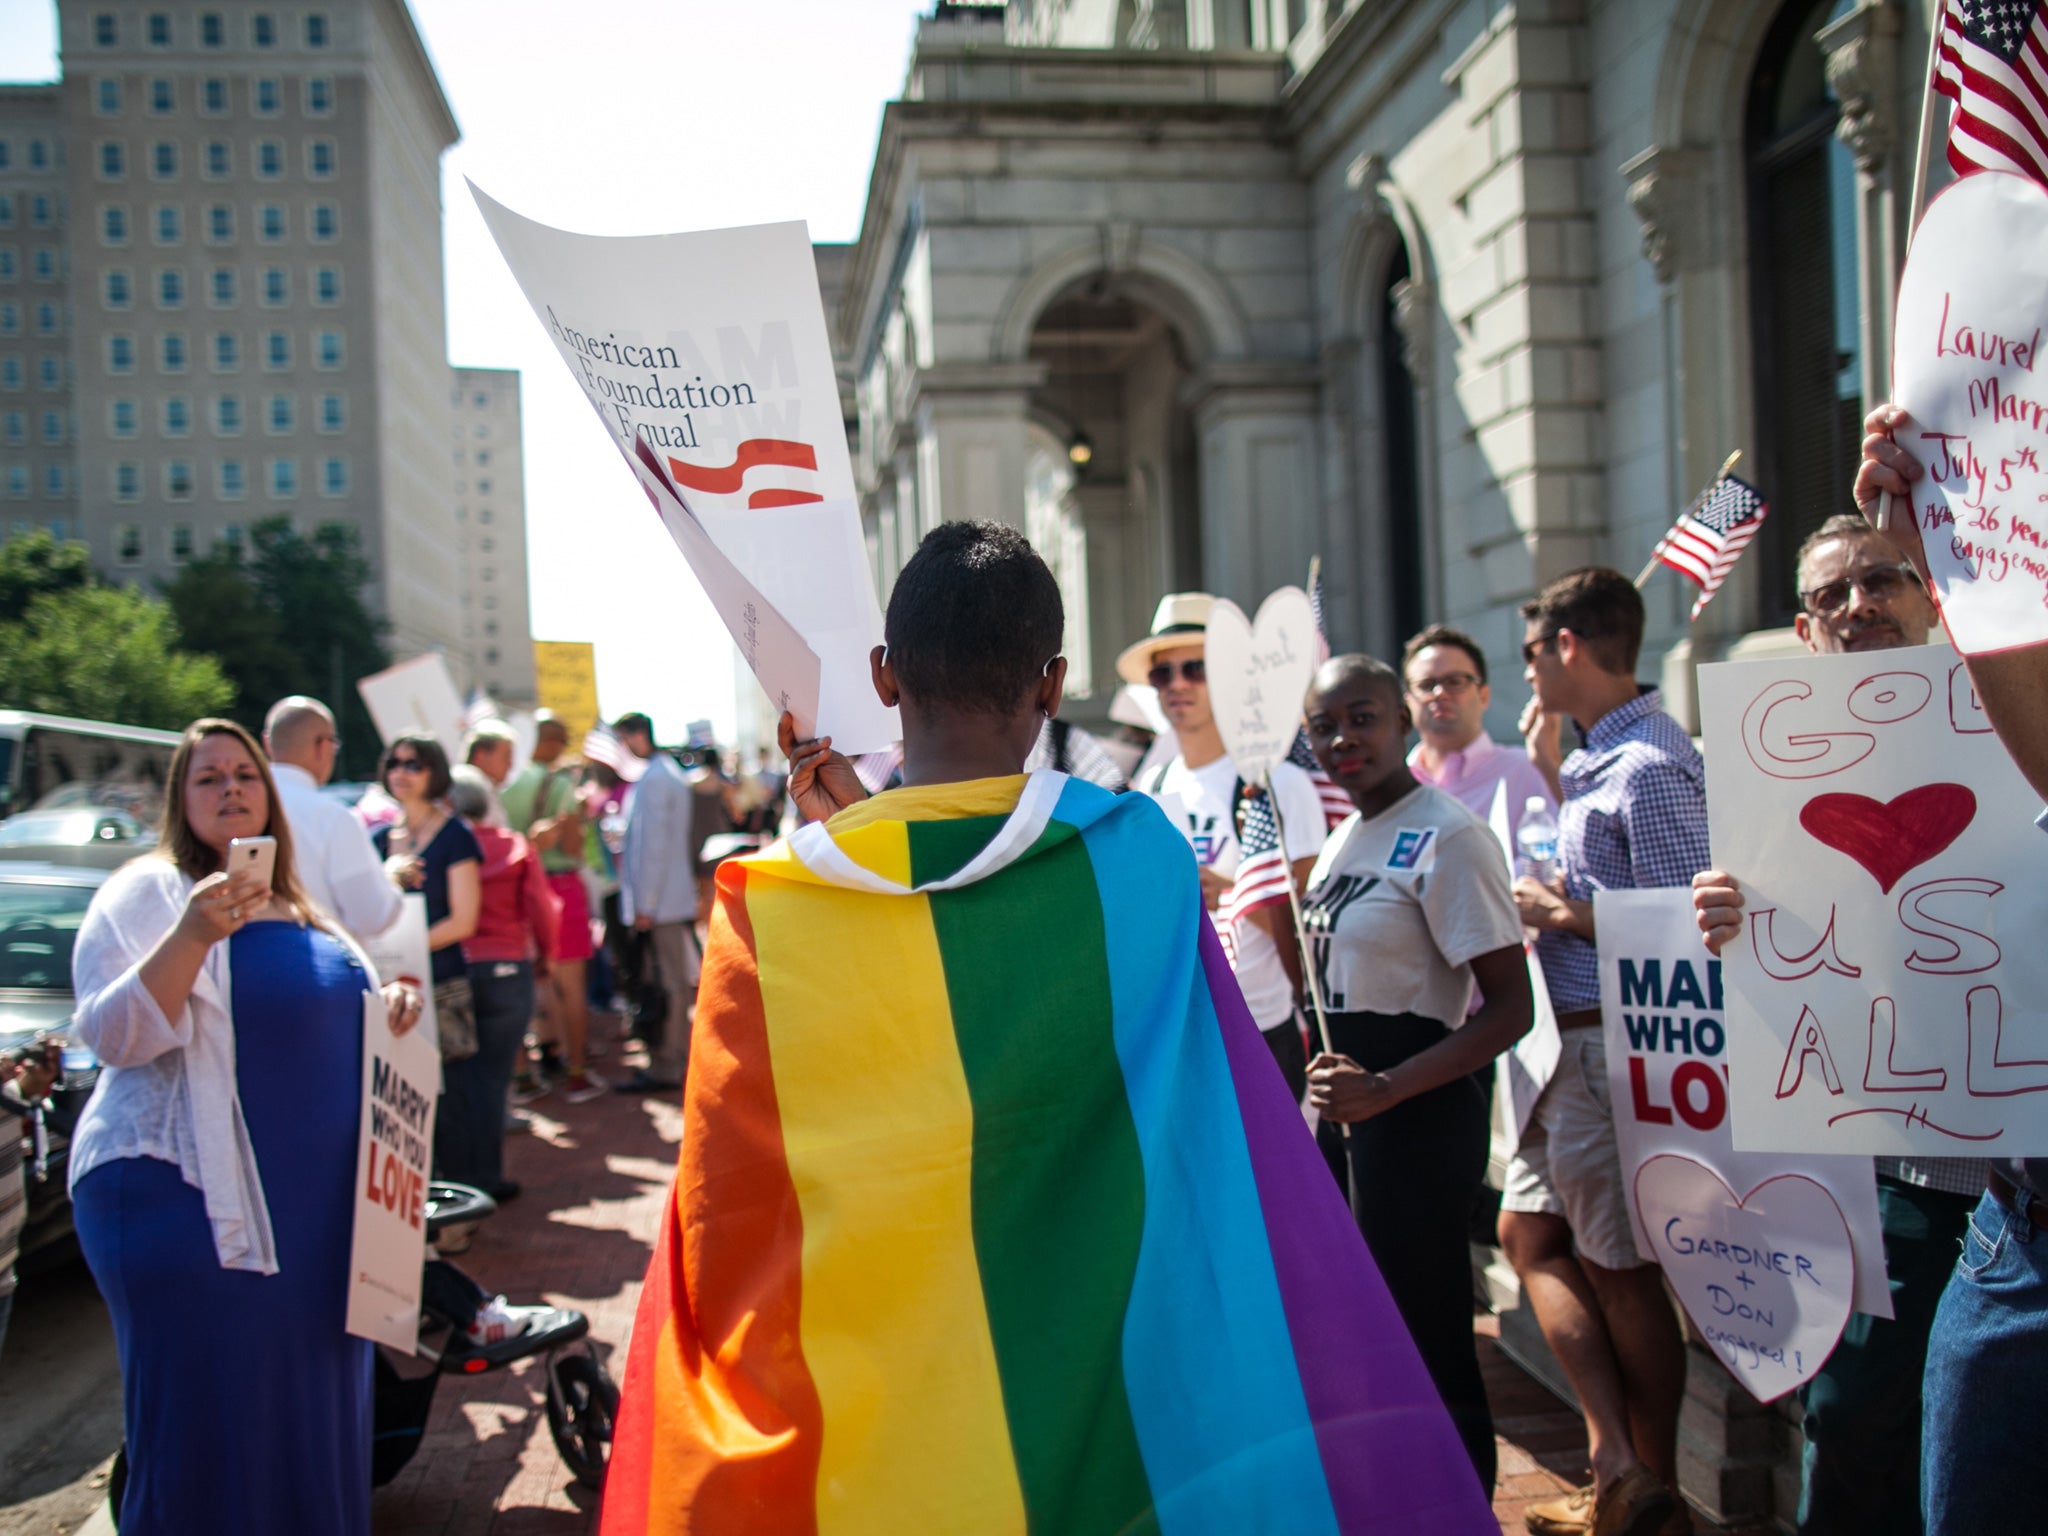 The move comes amid increasing support for gay rights and same sex marriage in much of the US. Source: Zach Gibson/Getty Images